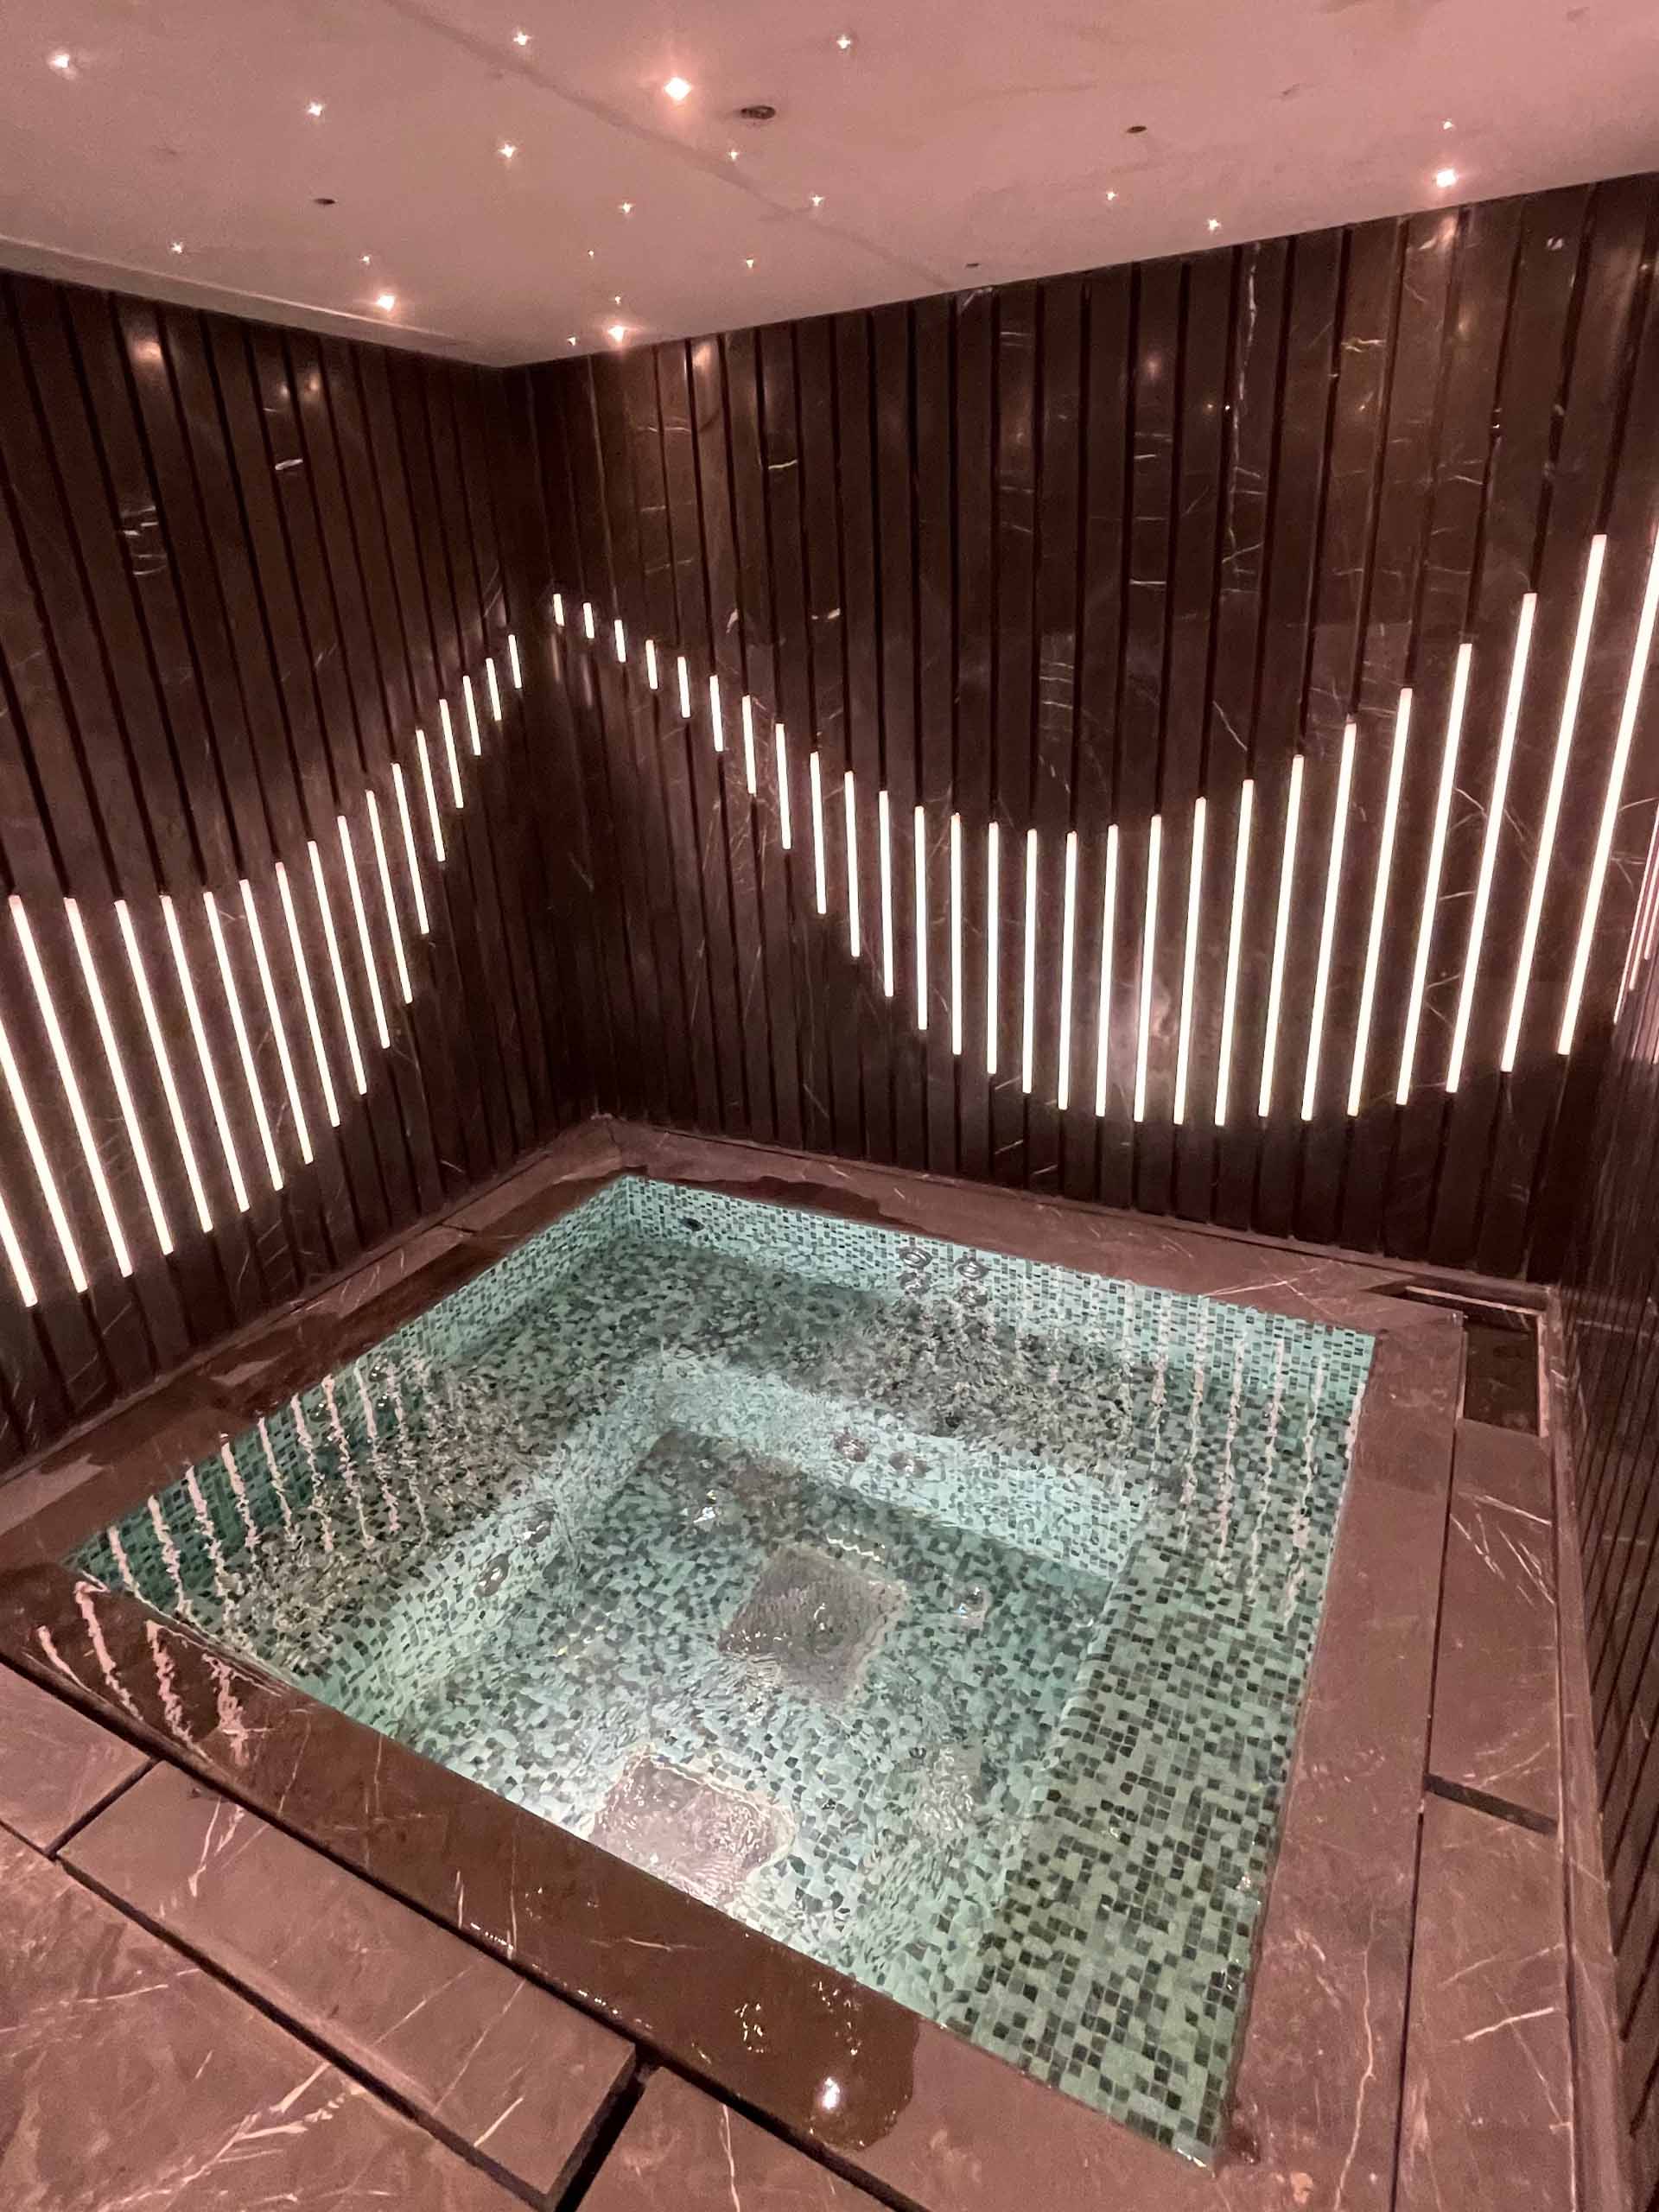 Dubai Elegance Unleashed - Purchase and install our jacuzzi masterpiece. Innovative design meets cost-effectiveness for a jacuzzi experience that's both opulent and reasonable.